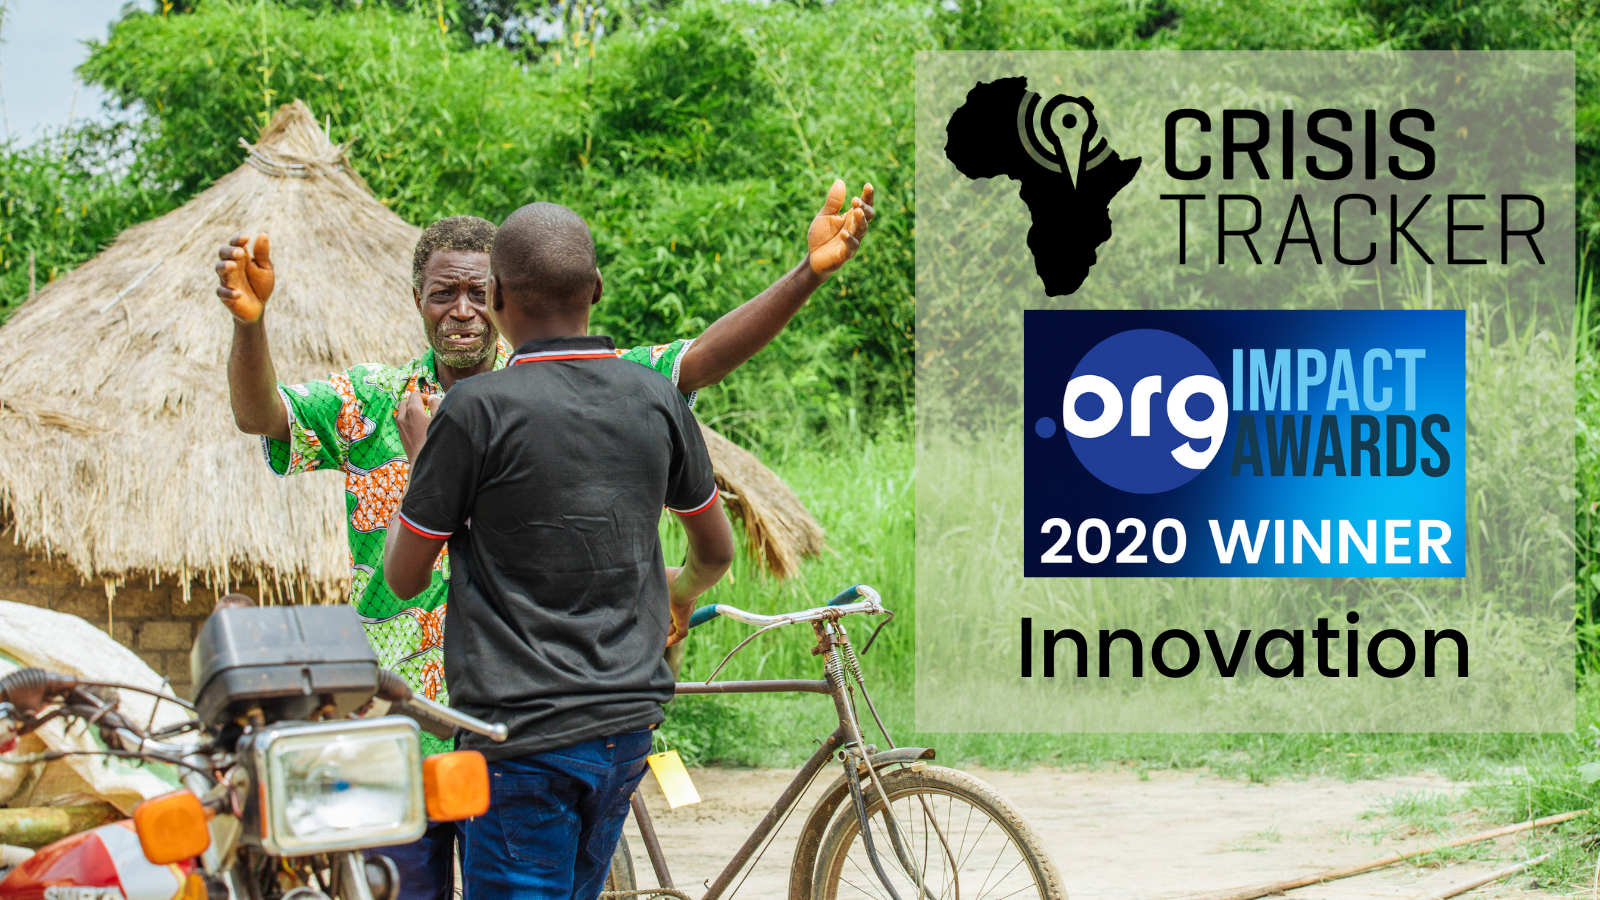 The Crisis Tracker is named a winner of the 2020 .ORG Impact Awards in the category of innovation.